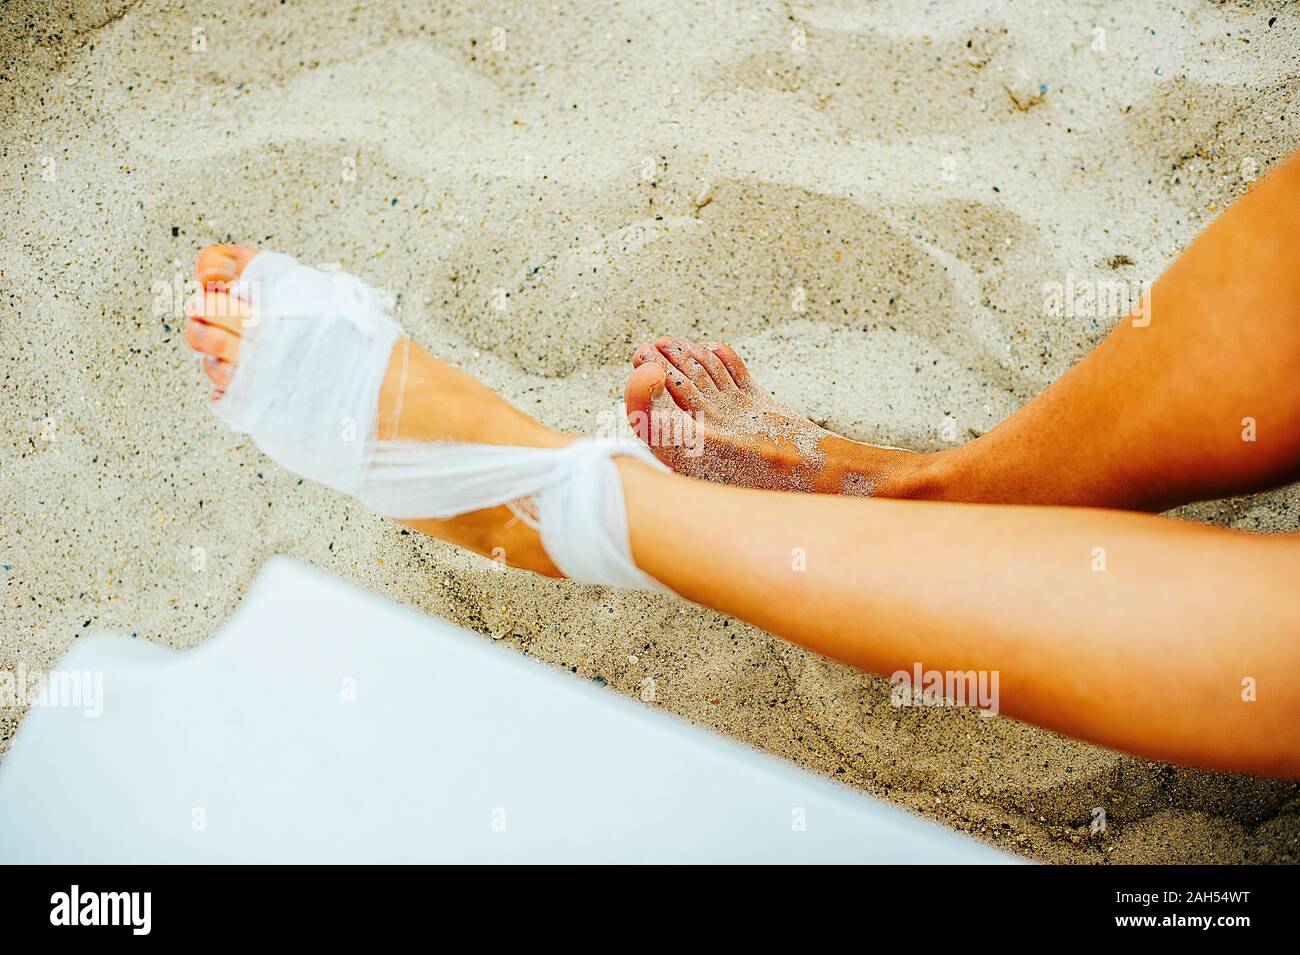 Gauze bandage the treating patients with man is wrapping his foot injury on the beach Stock Photo